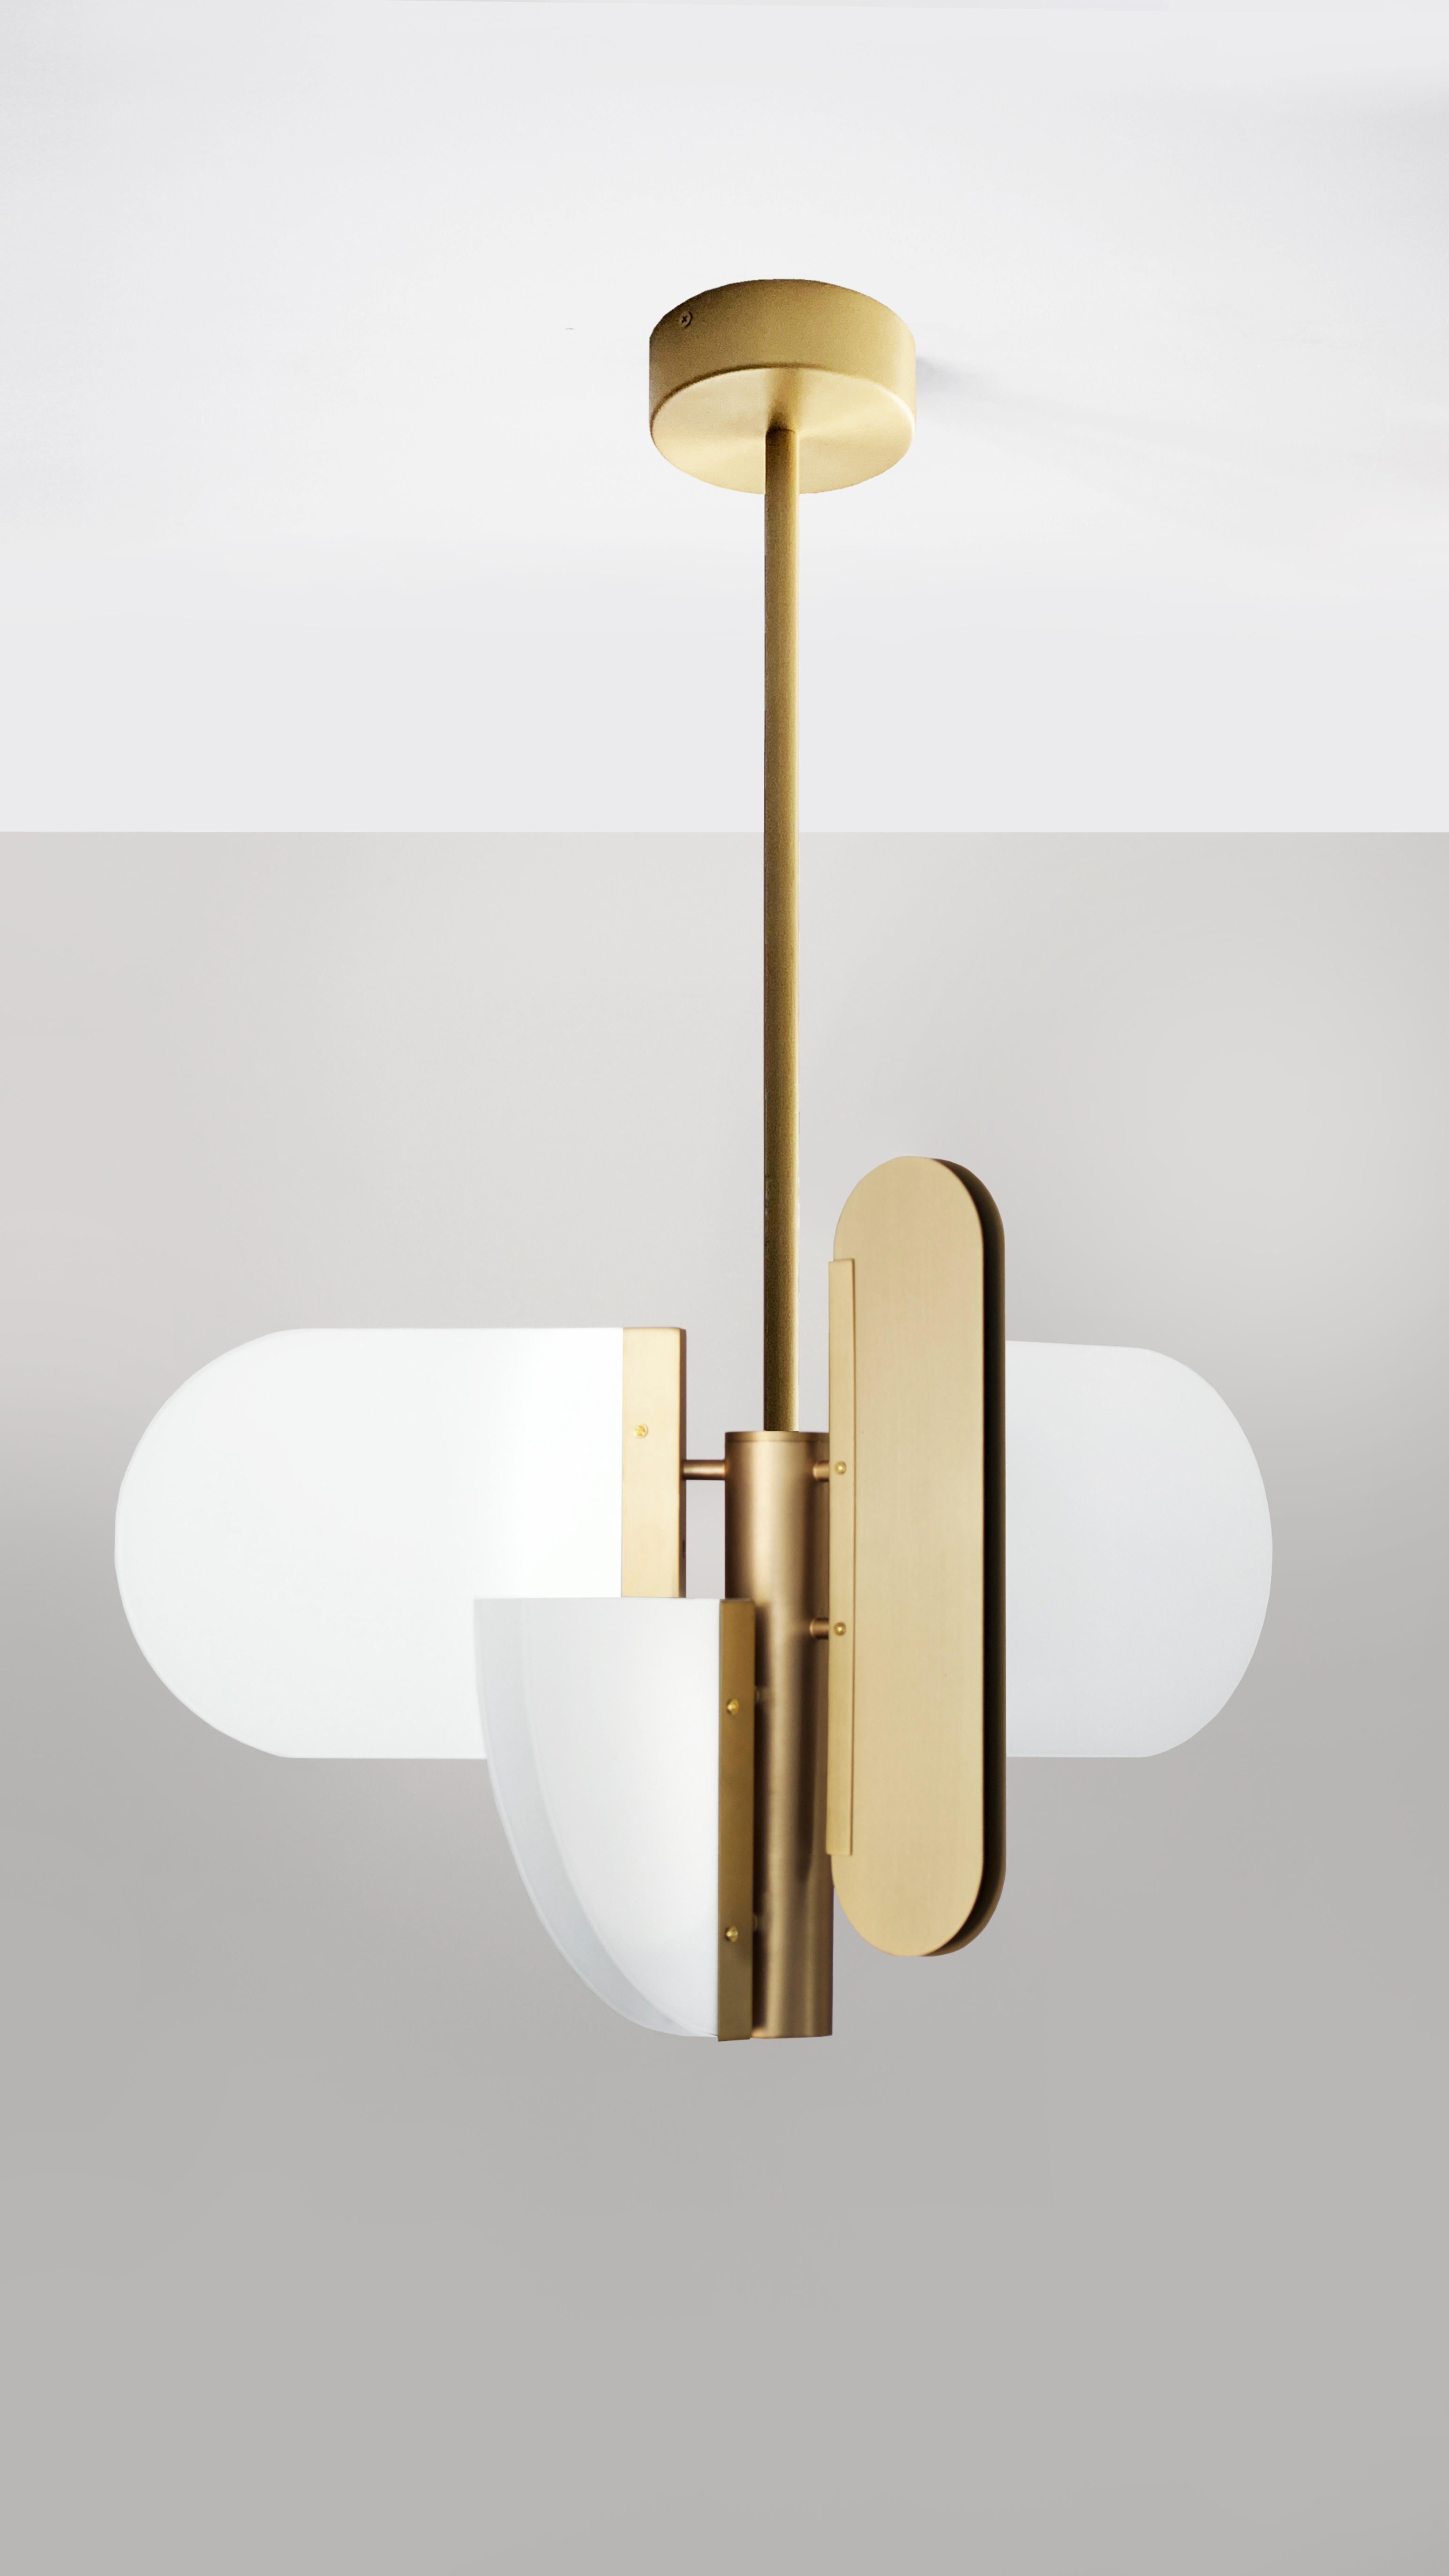 Brass Geometric Task Pendant Lamp by Square in Circle
Dimensions: W 42.5 x H 70 x D 38 cm
Materials: Brushed brass finish, white frosted glass

A play on geometry. Random geometric shapes were rotated horizontally and vertically, then joined